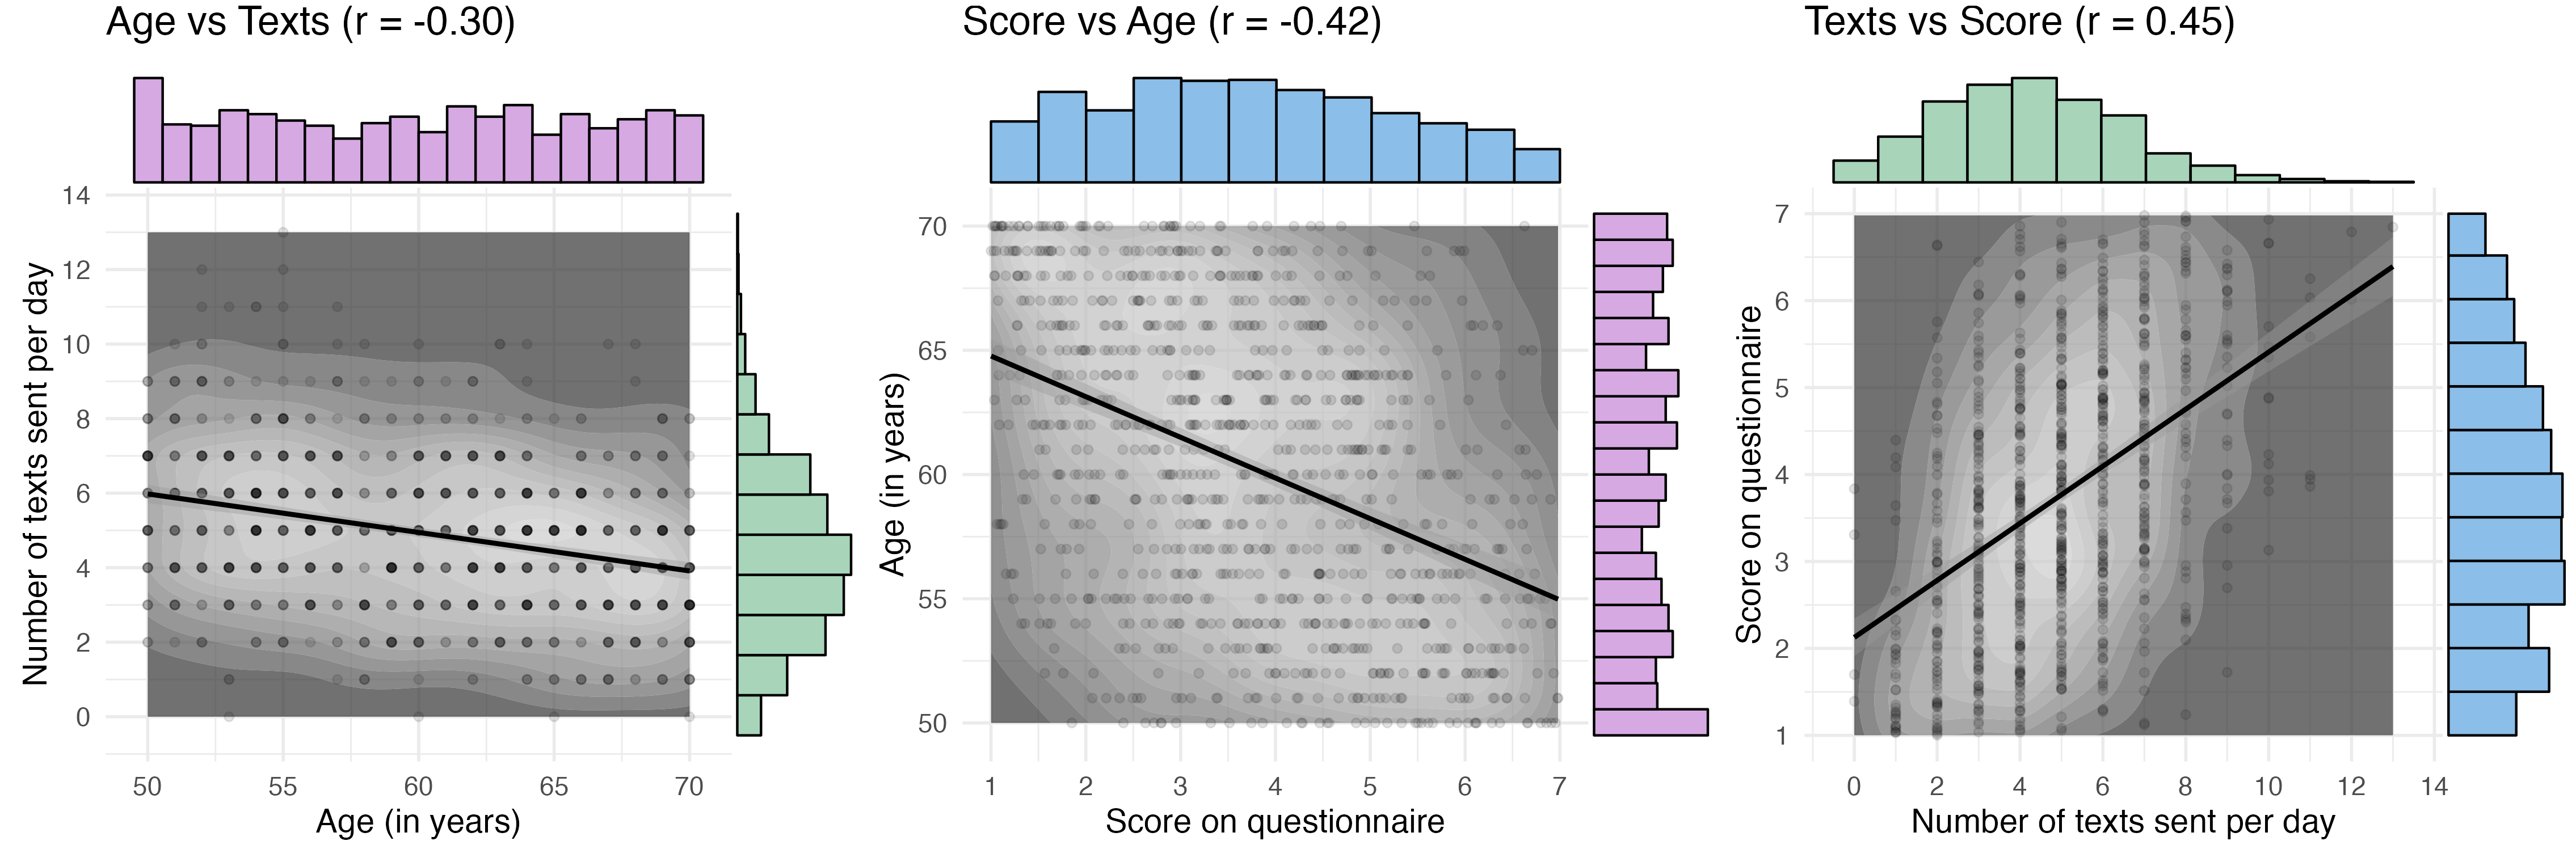 Three plots showing the correlations between 1) Age vs Texts (r = -0.30), 2) Score vs Age (r = -0.42), 3) Texts vs Score (r = 0.45). Age has a uniform distribution between 50 and 70, texts have a poisson distribution with a mean of 5, and score has a truncated normal distribution ranging from 1 to 7.